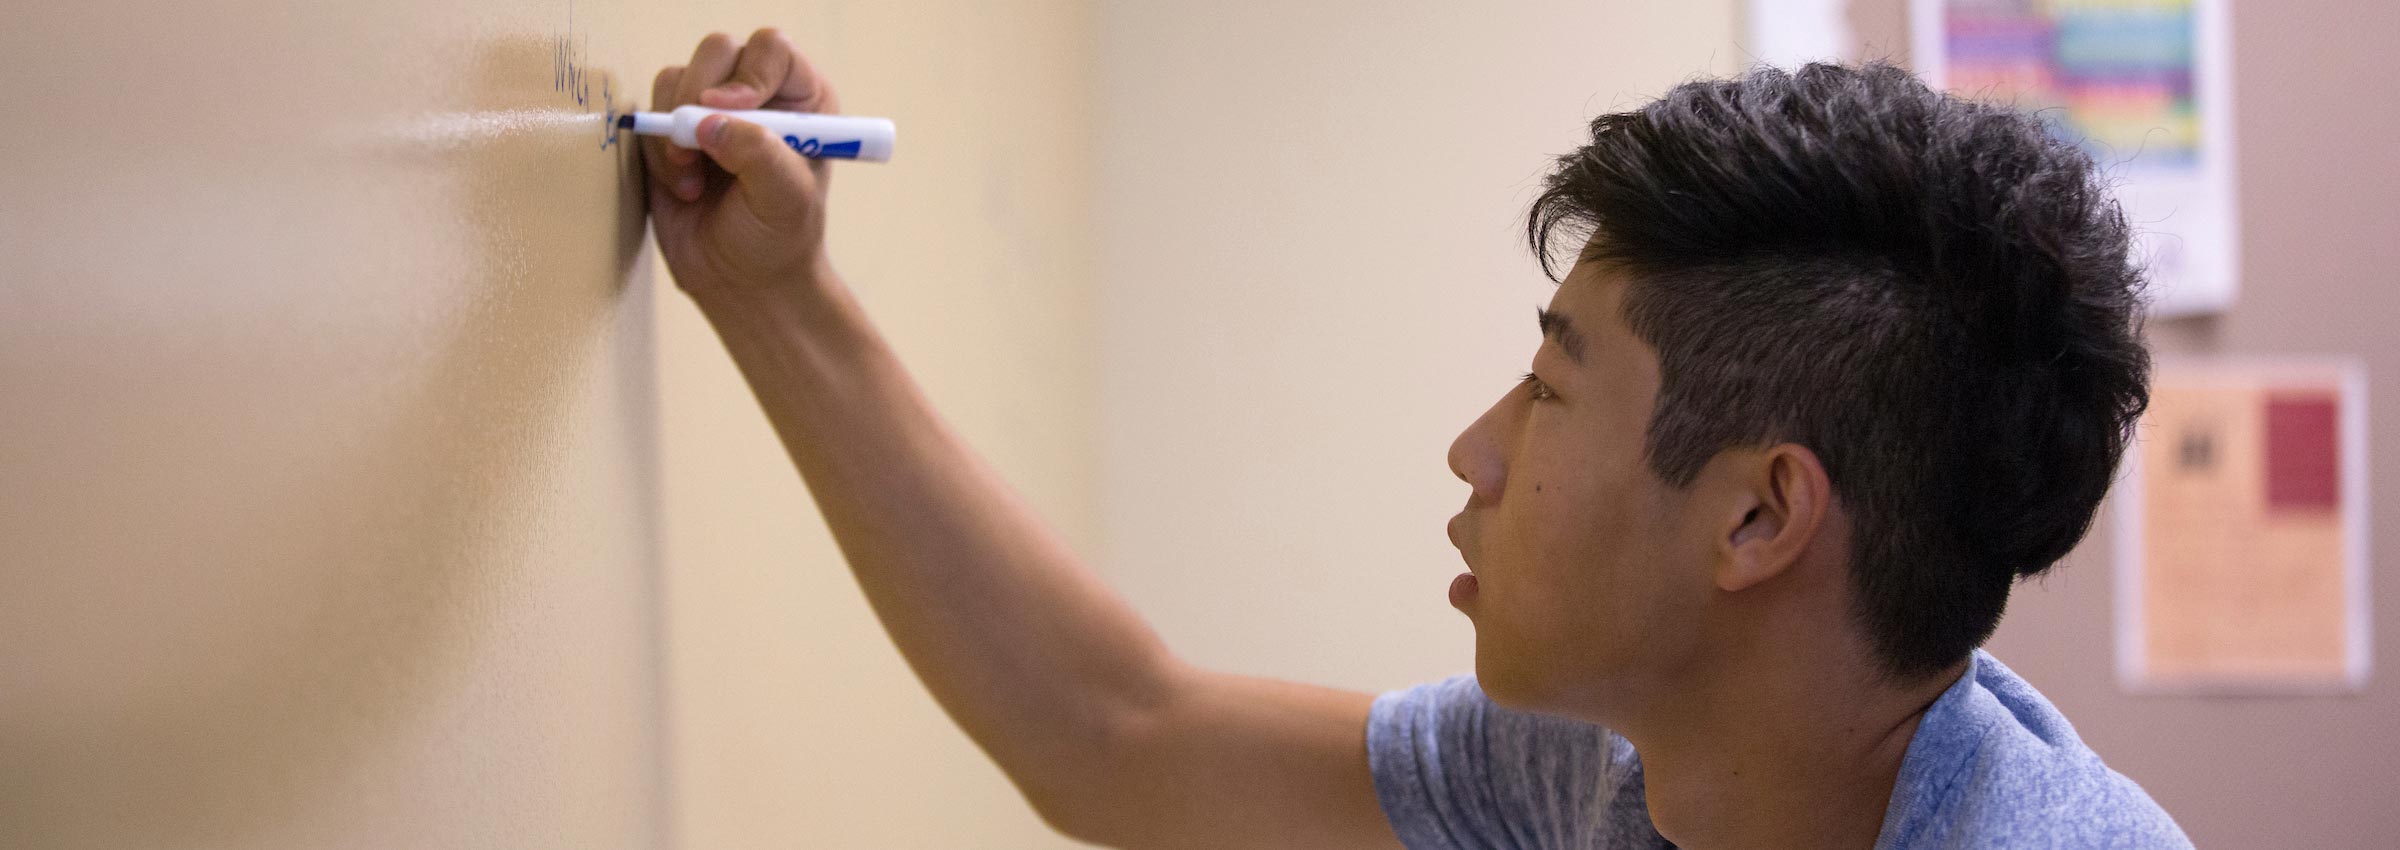 International student working on a white board at UW-Whitewater